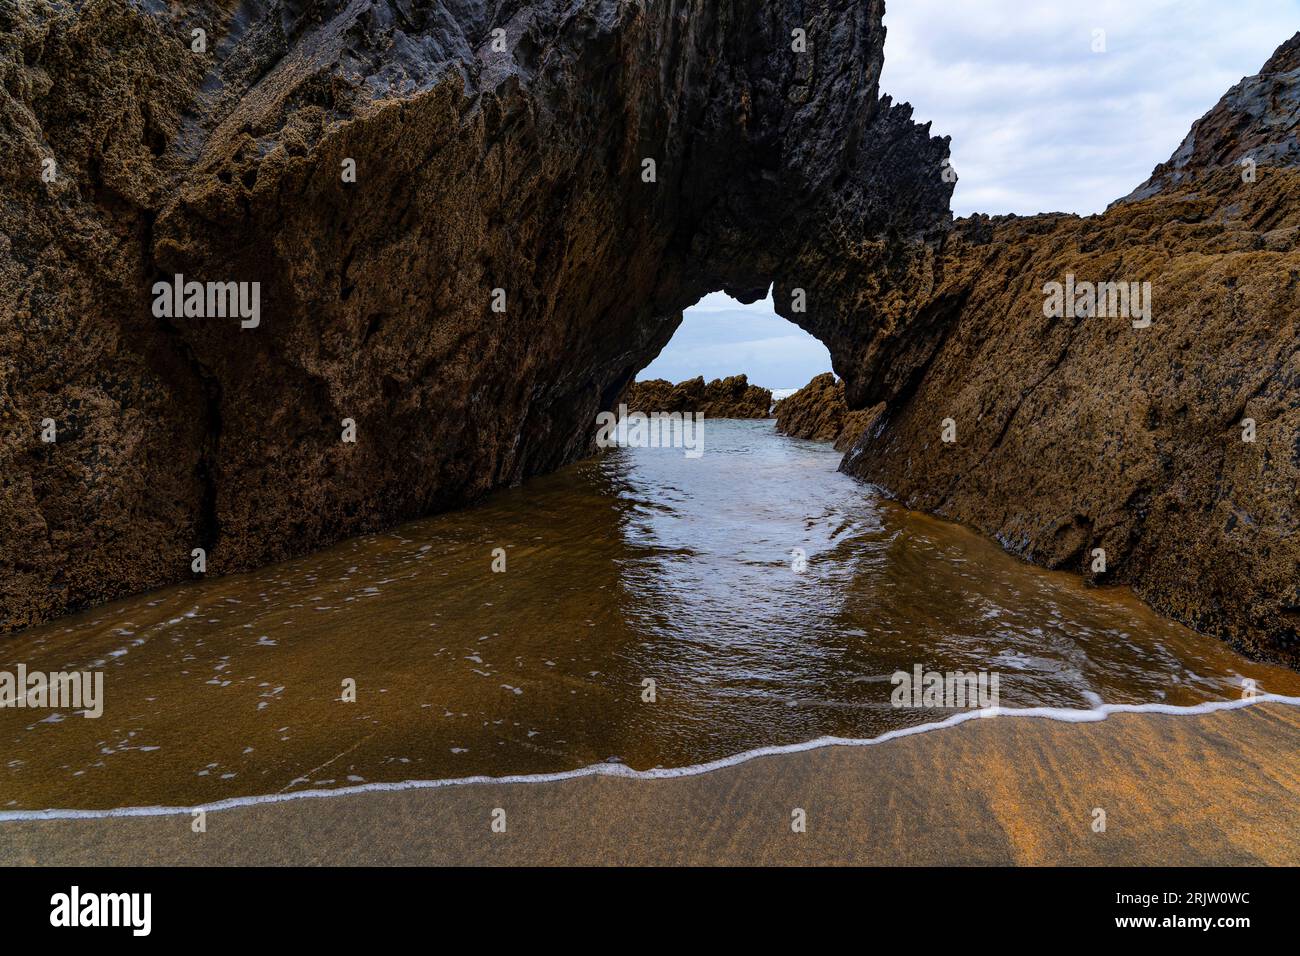 Natural archway, Playa de Otur, Asturias - Otur beach part of the Protected Landscape of the Western Coast of Asturias, Spain. Stock Photo